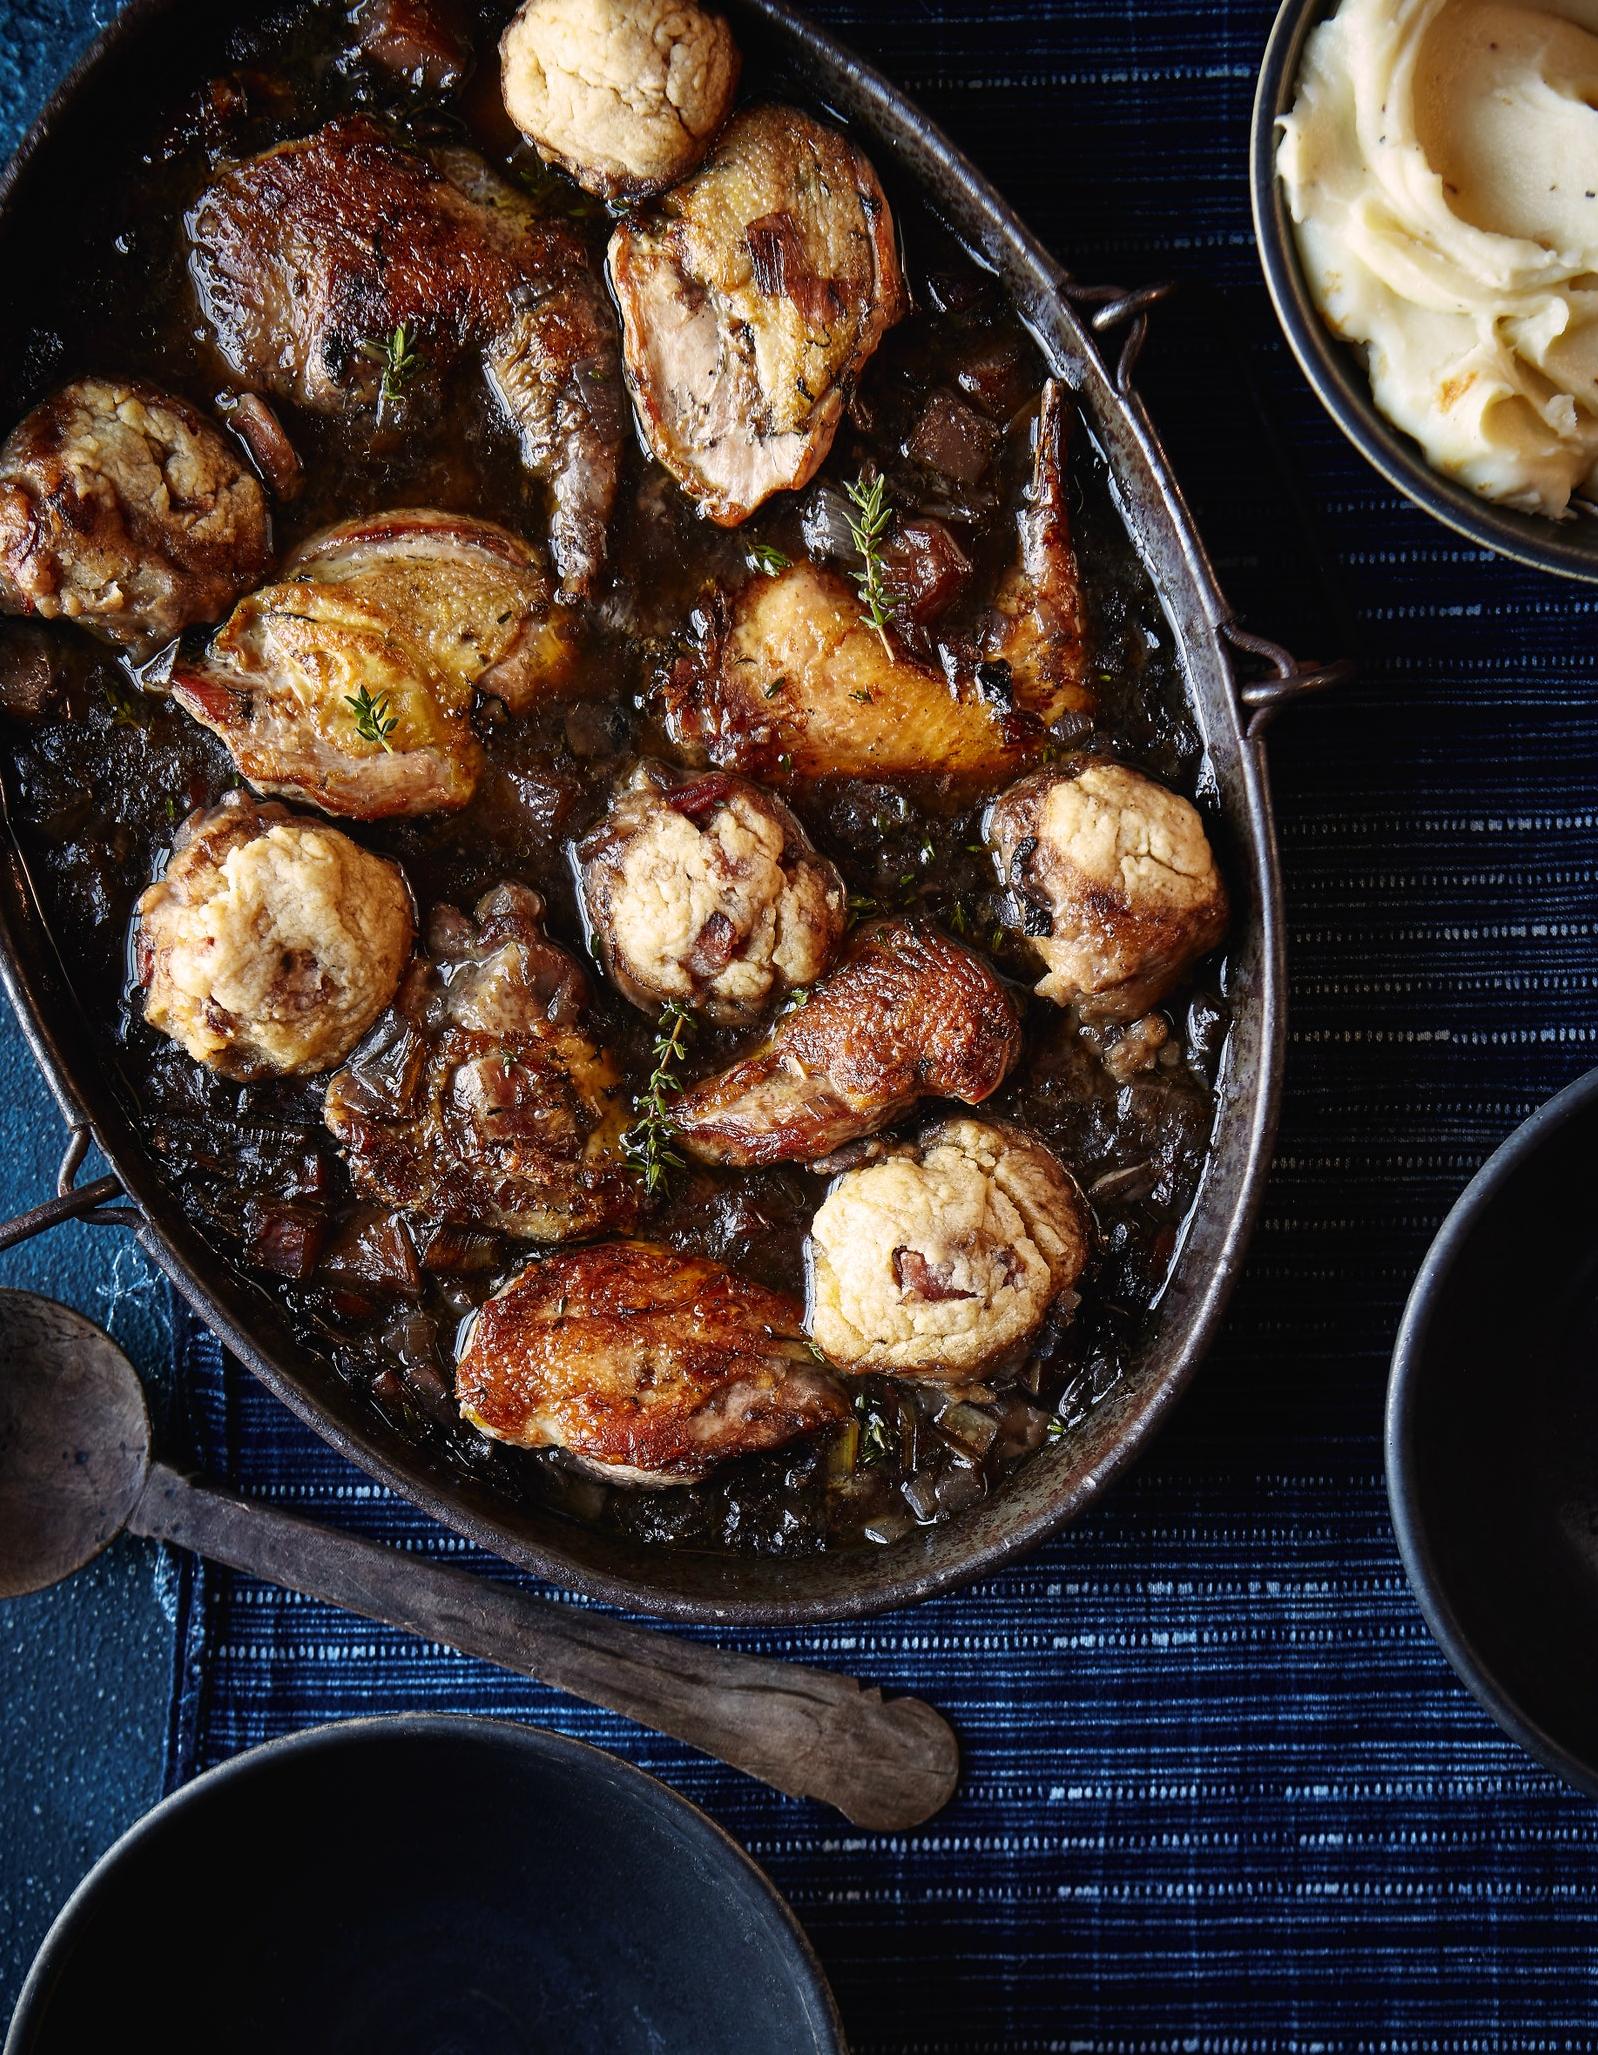  A casserole fit for a cozy evening in